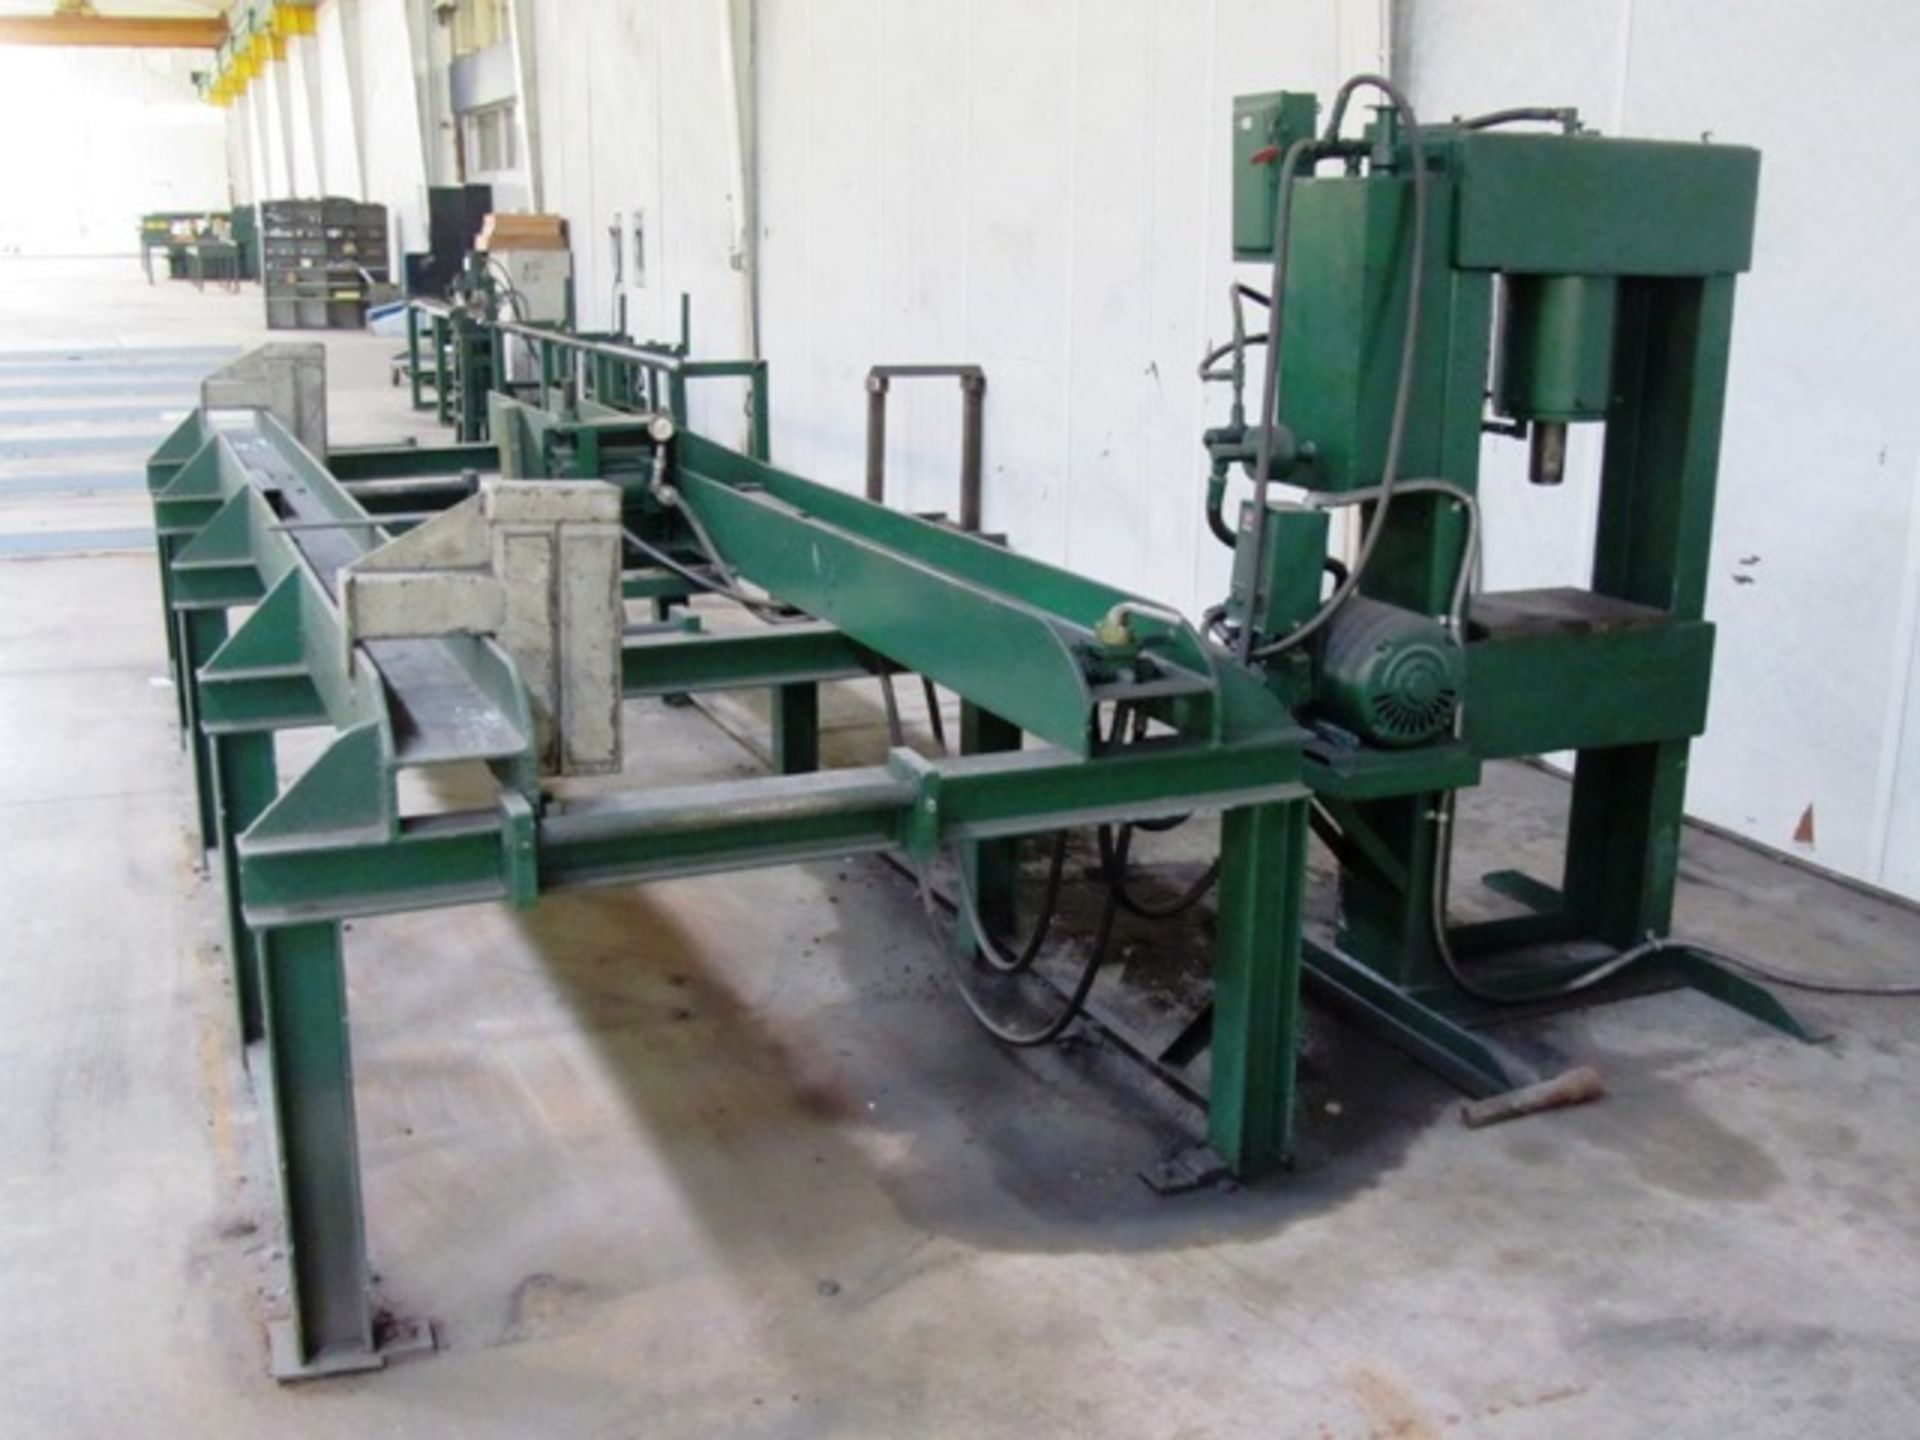 Approx 75 Ton Shop Built H Frame Hydraulic Press with 22'' Between Uprights with Horizontal Beam